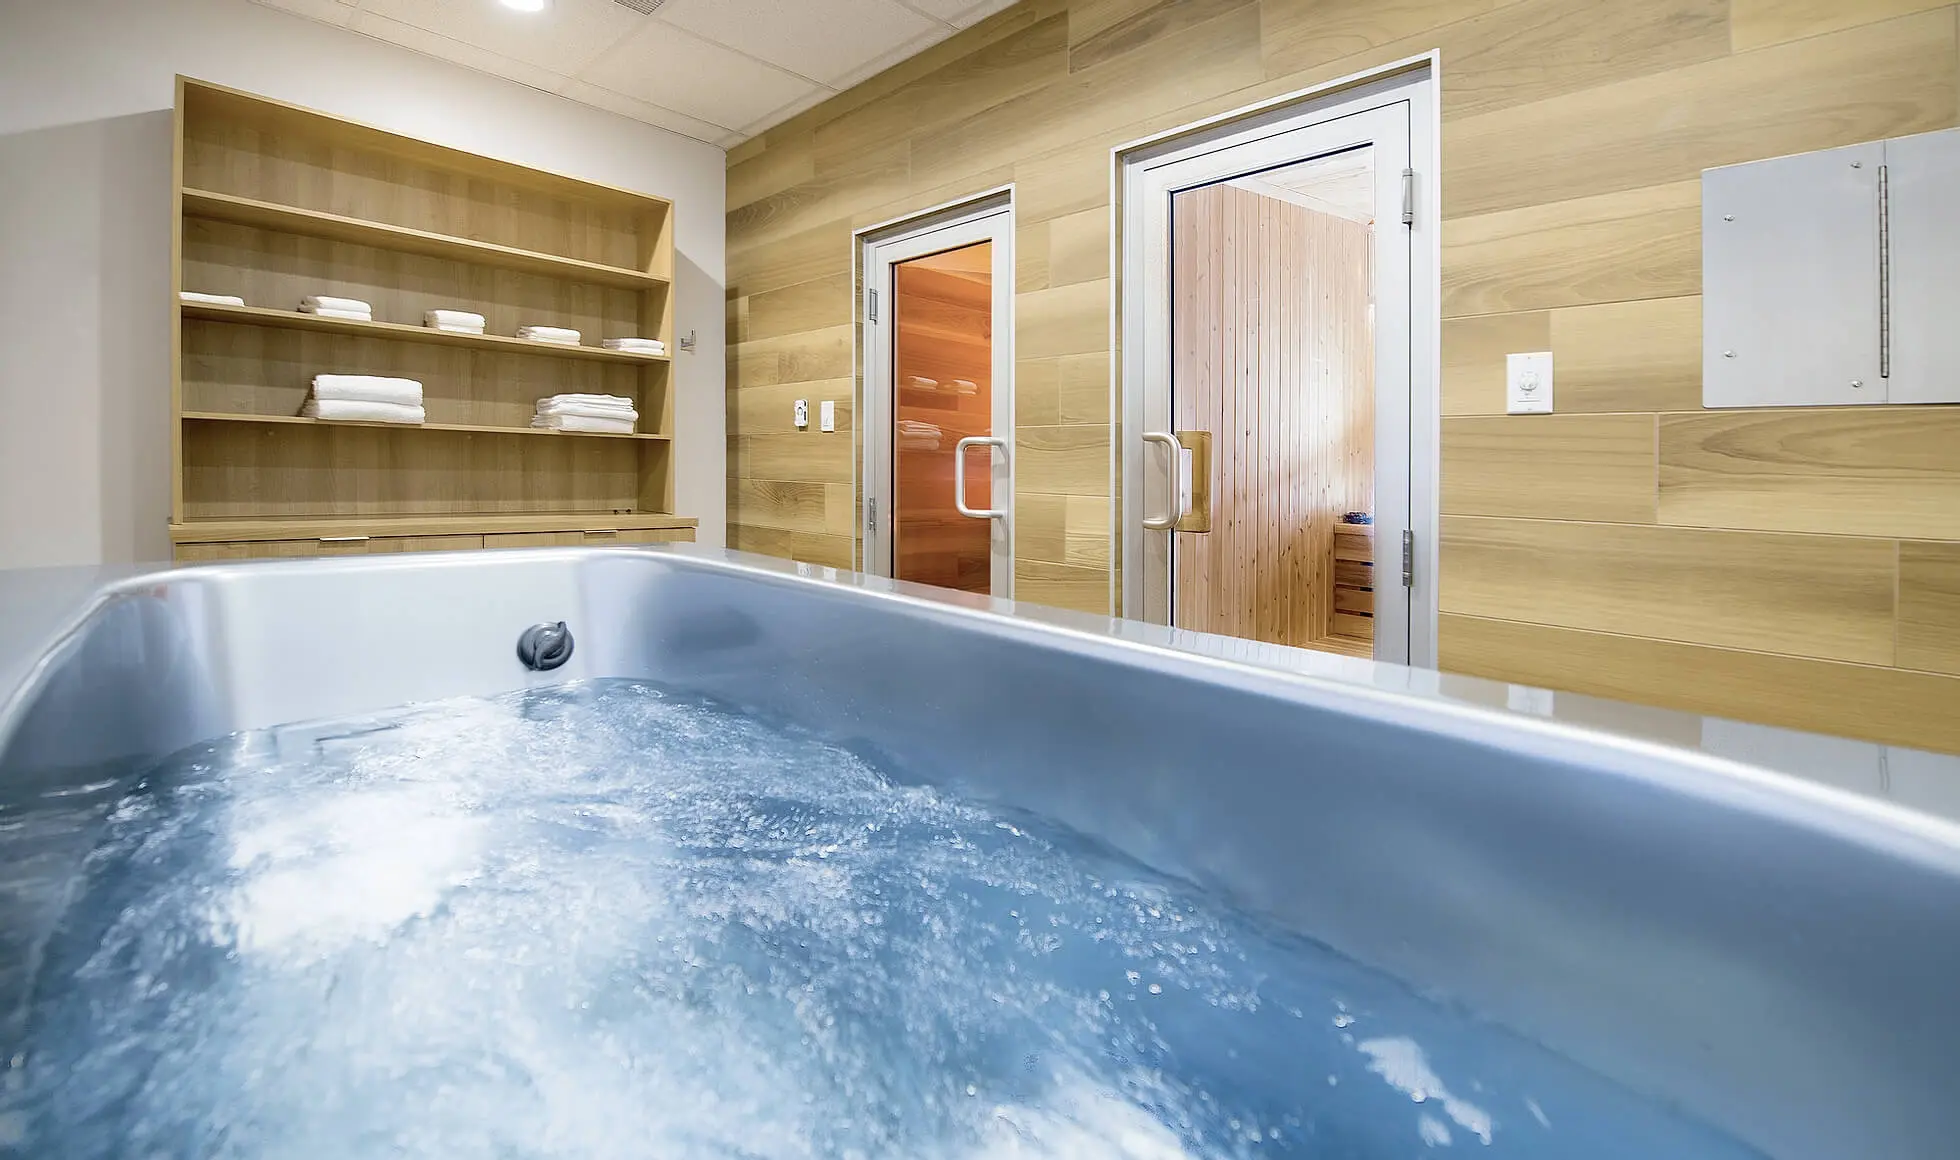 Spa at Hockey Etcetera with a jet tub, and sauna.